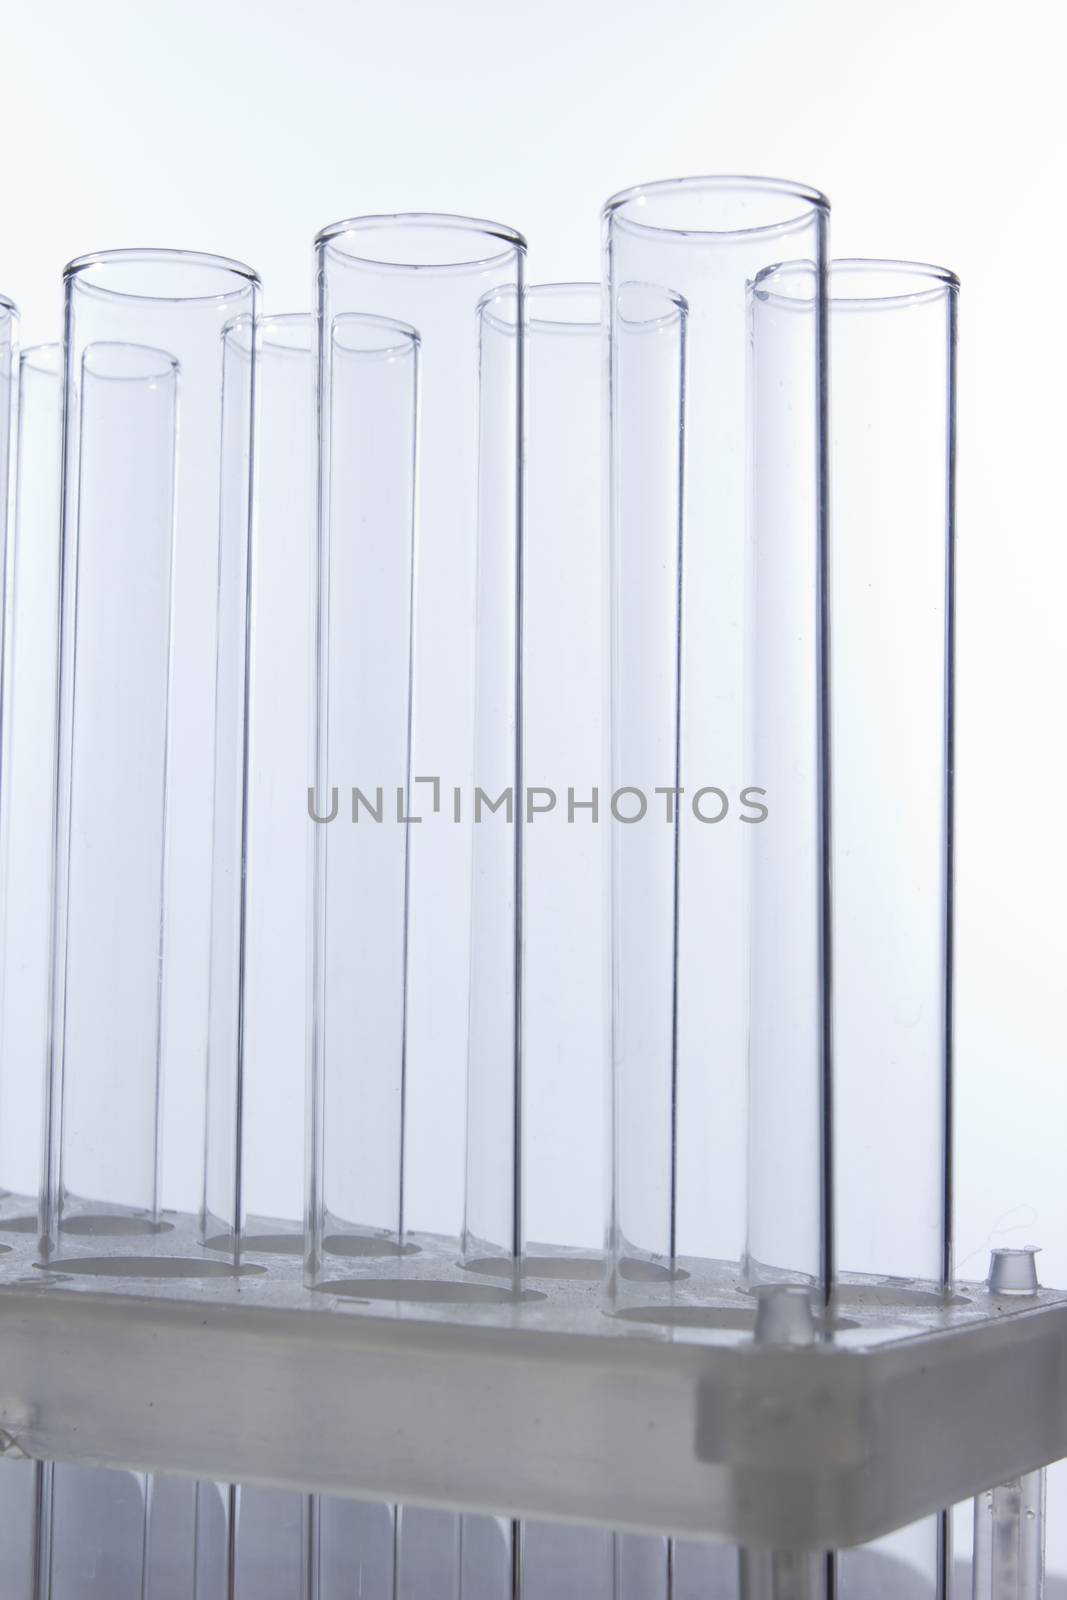 Empty test tubes for analysis in the laboratory